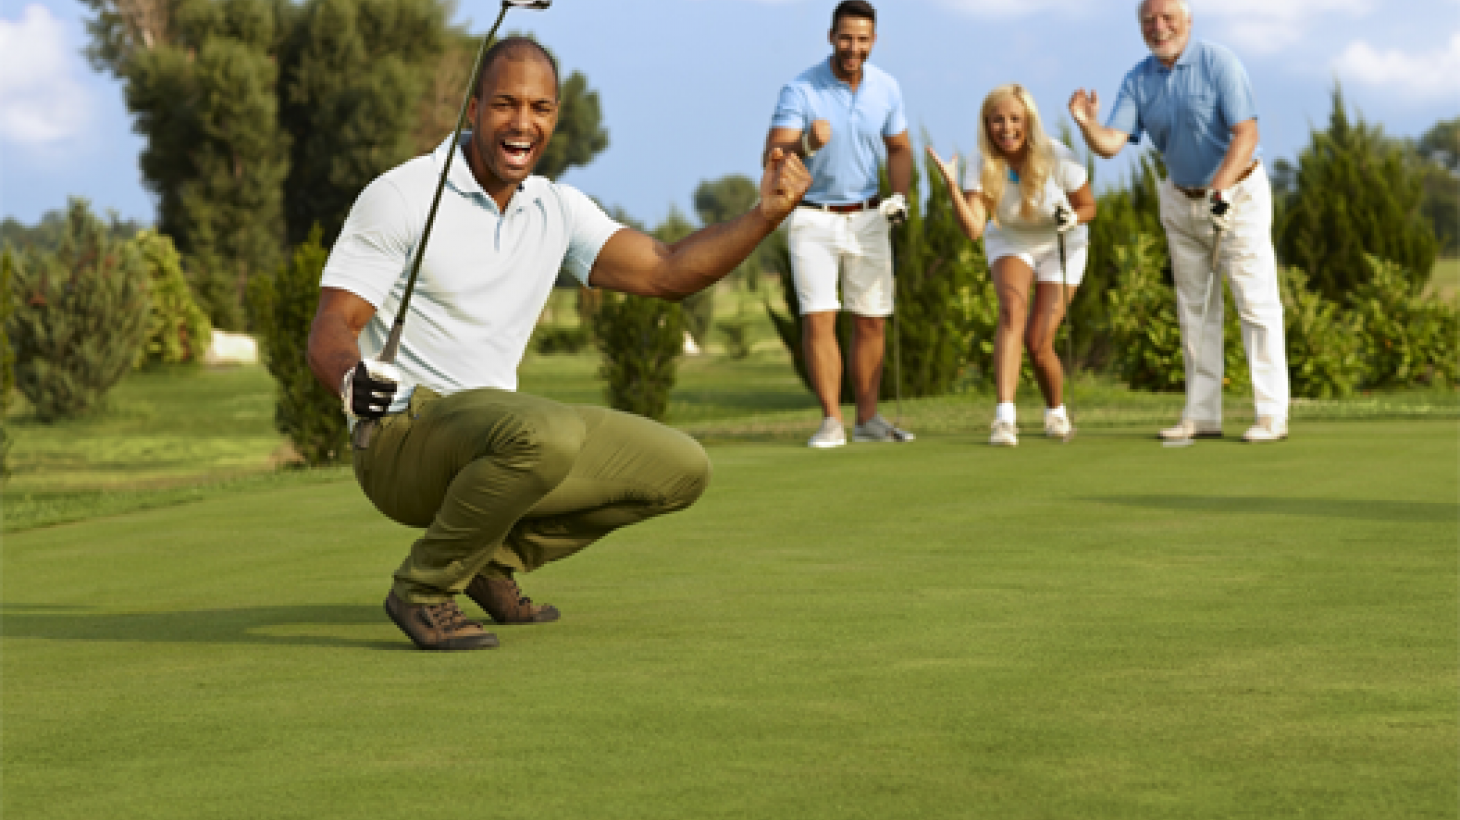 A Quick 11 Checklist for Planning Your Company Golf Tournament